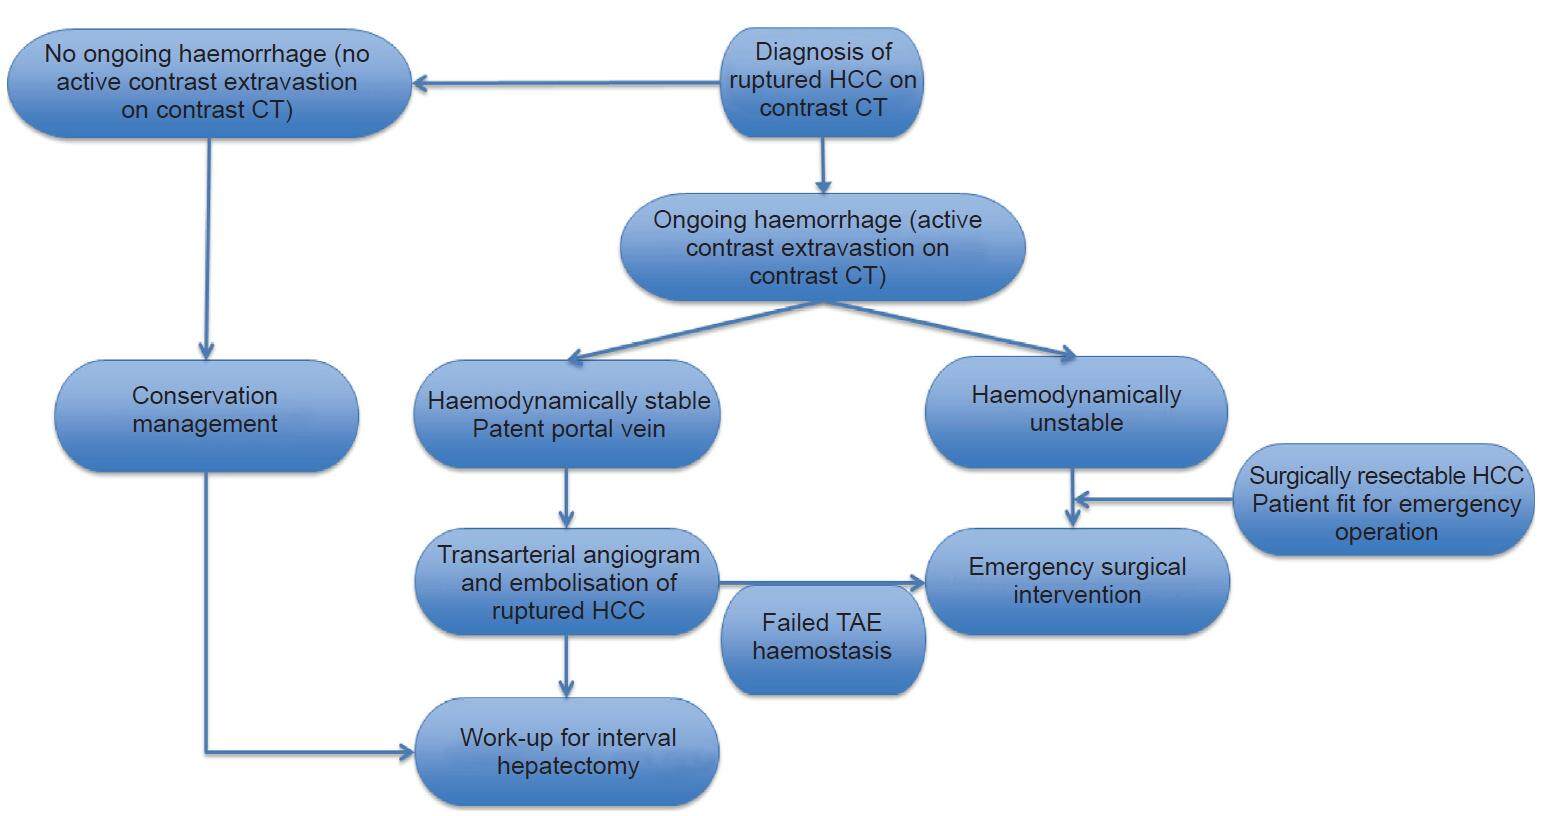 Outcomes of emergency and interval hepatectomy for ruptured resectable hepatocellular carcinoma: a single tertiary referral centre experience